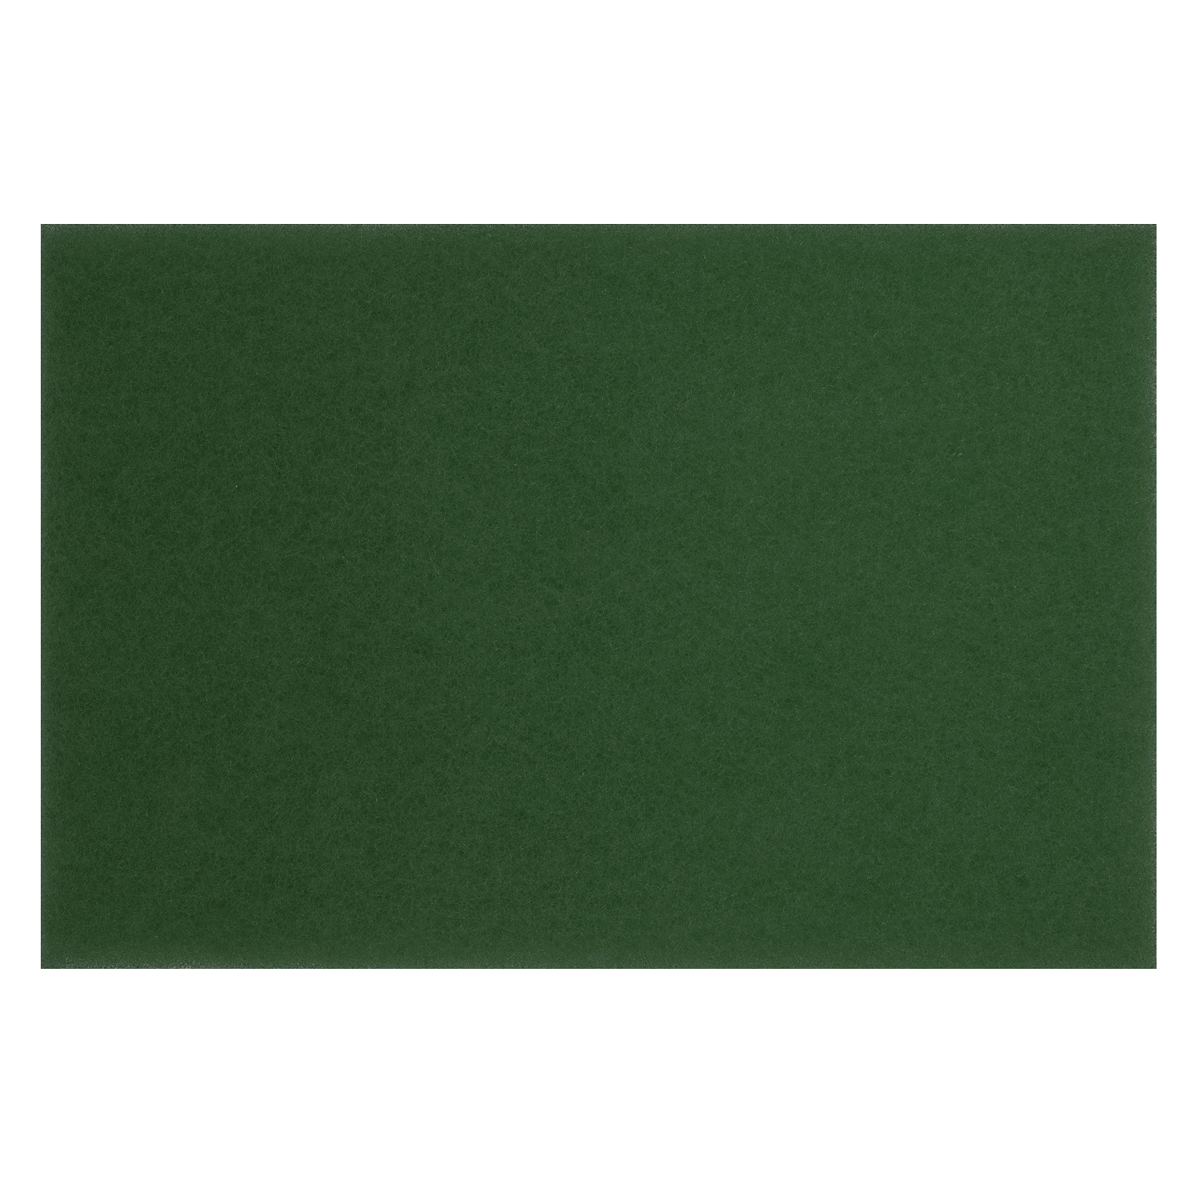 Green Scrubber Pads 12 x 18 x 1" - Pack of 5 - GSP1218 - Farming Parts